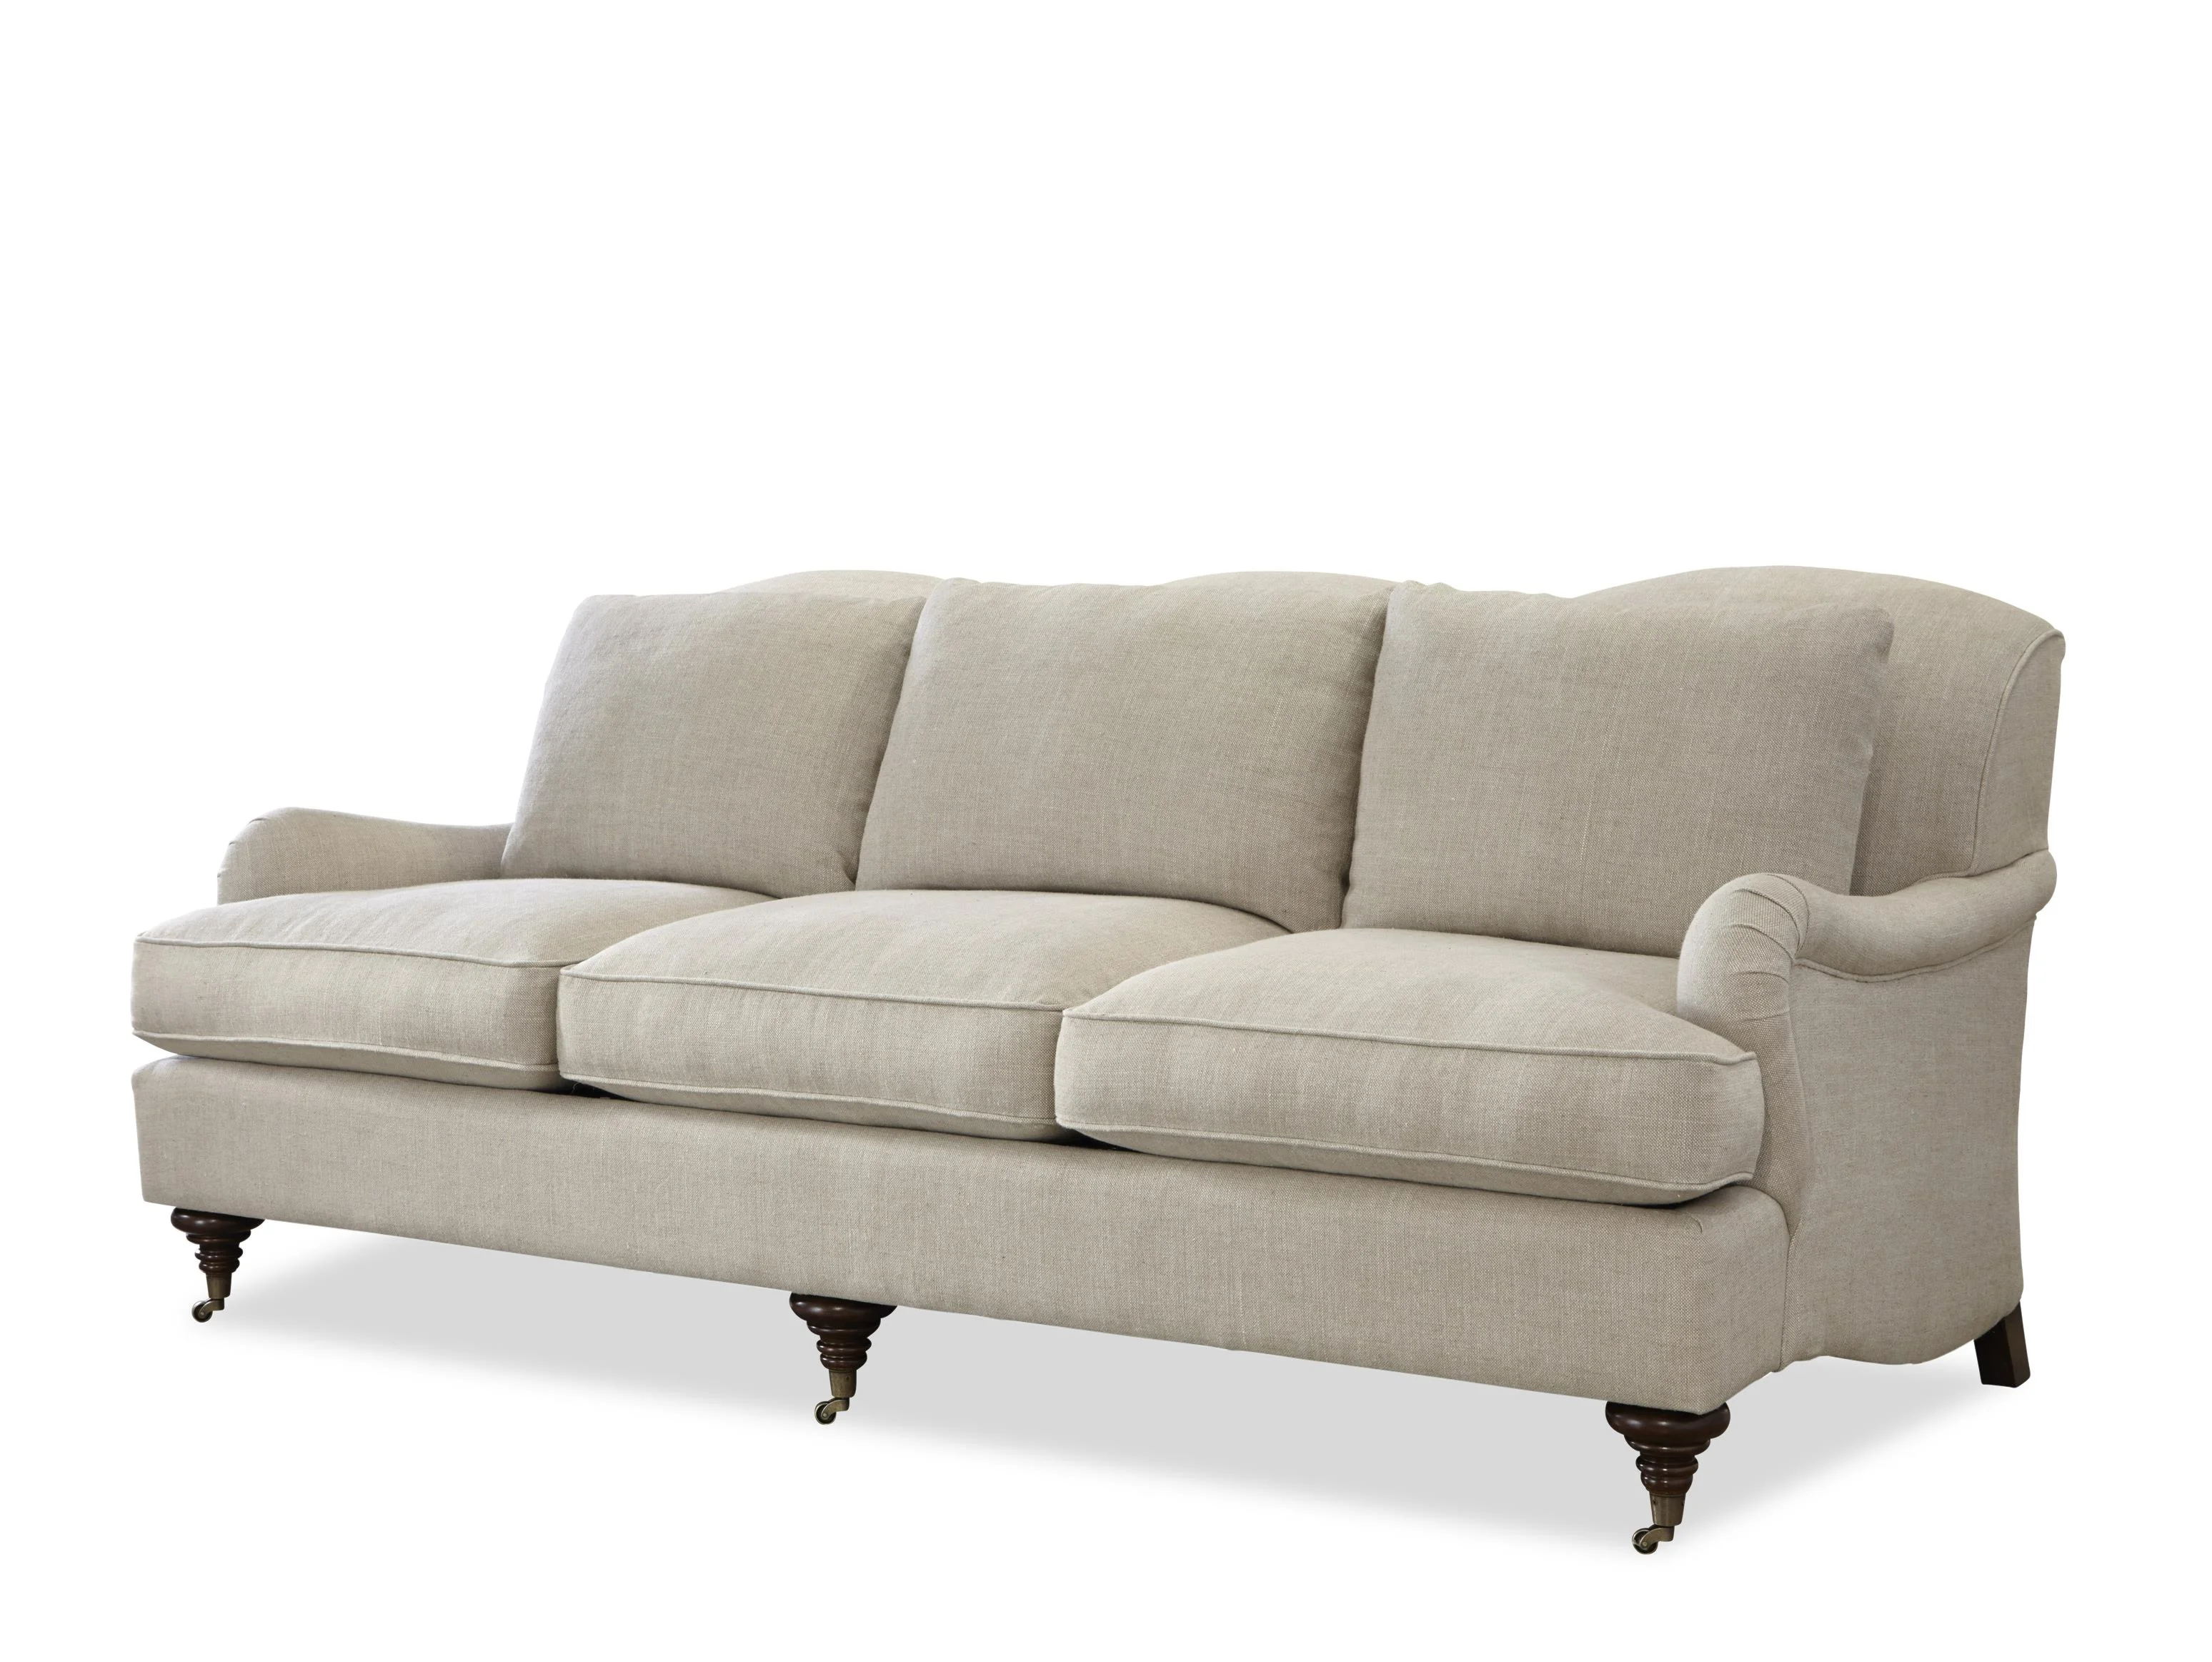 Universal Churchill Traditional Stationary Sofa with English Arms | Reeds  Furniture | Sofa